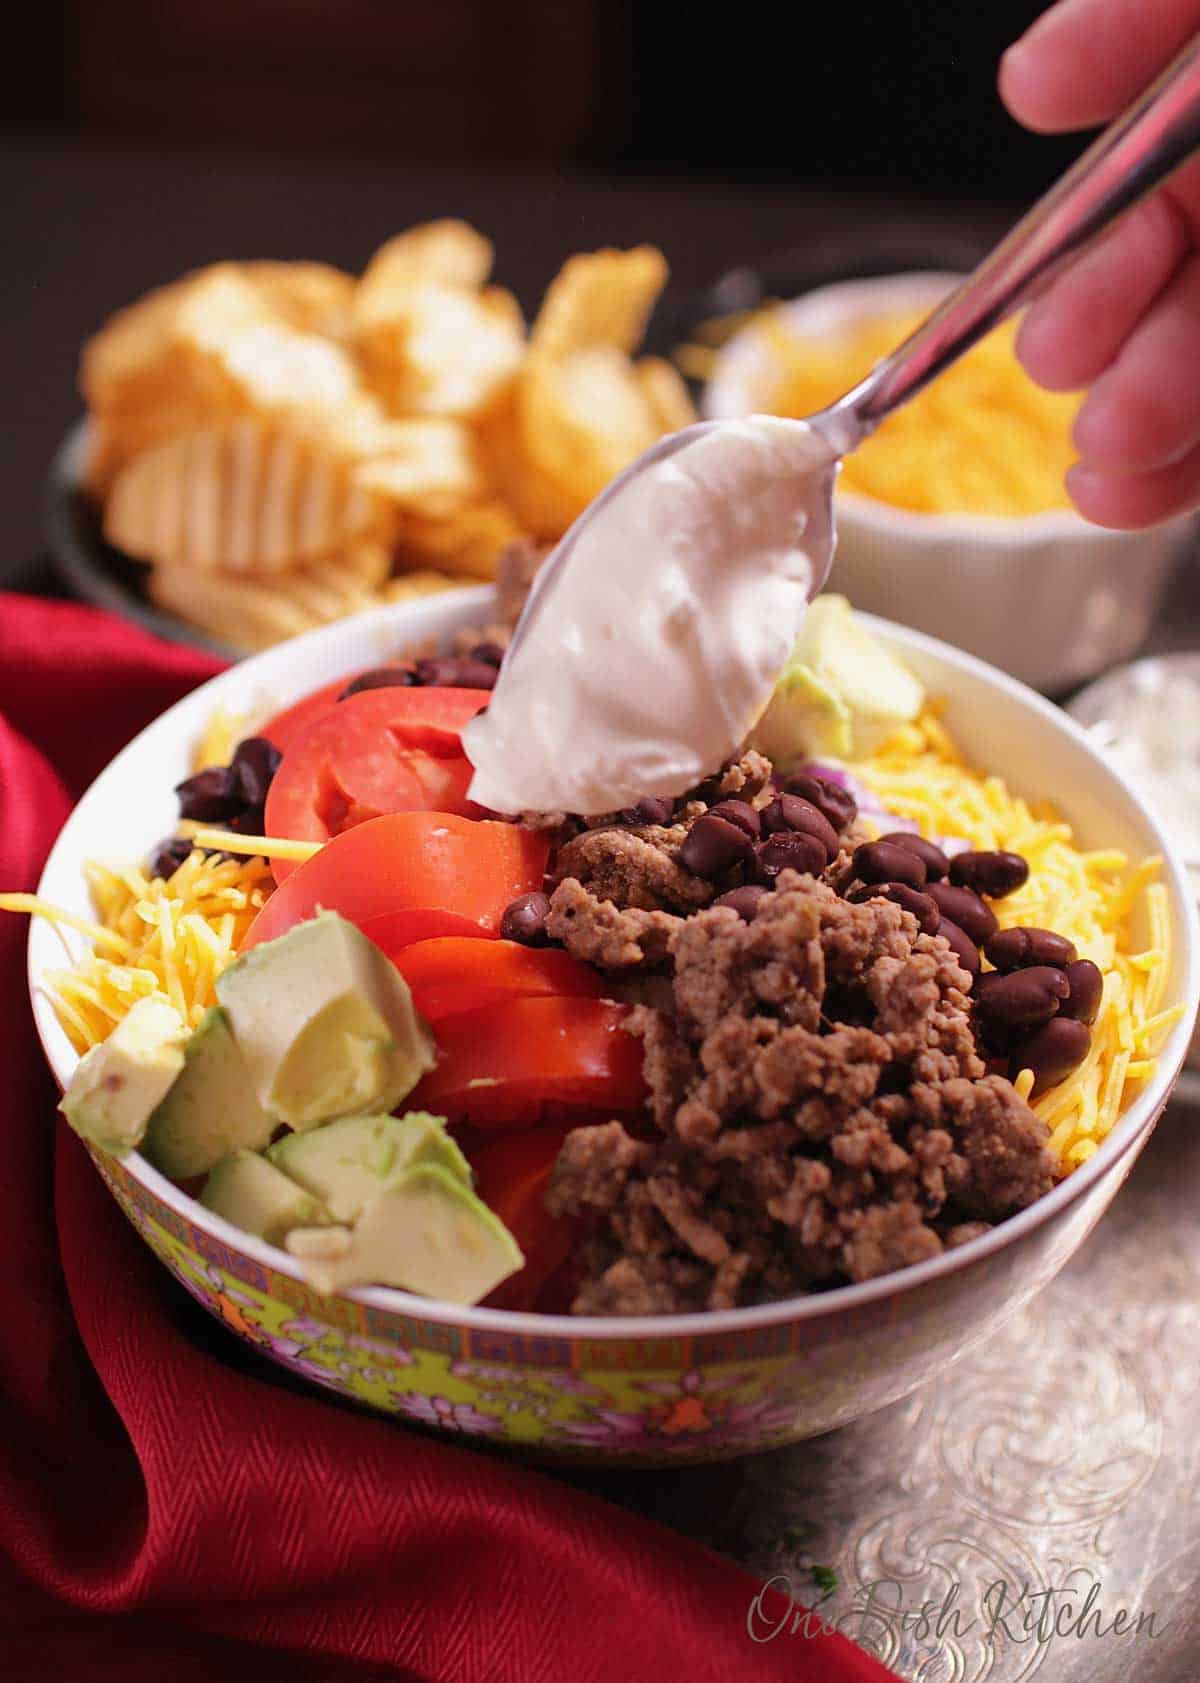 Placing a dollop of sour cream on top of a bowl of taco salad filled with ground beef, tomatoes, avocados and cheese next to a bowl of chips.